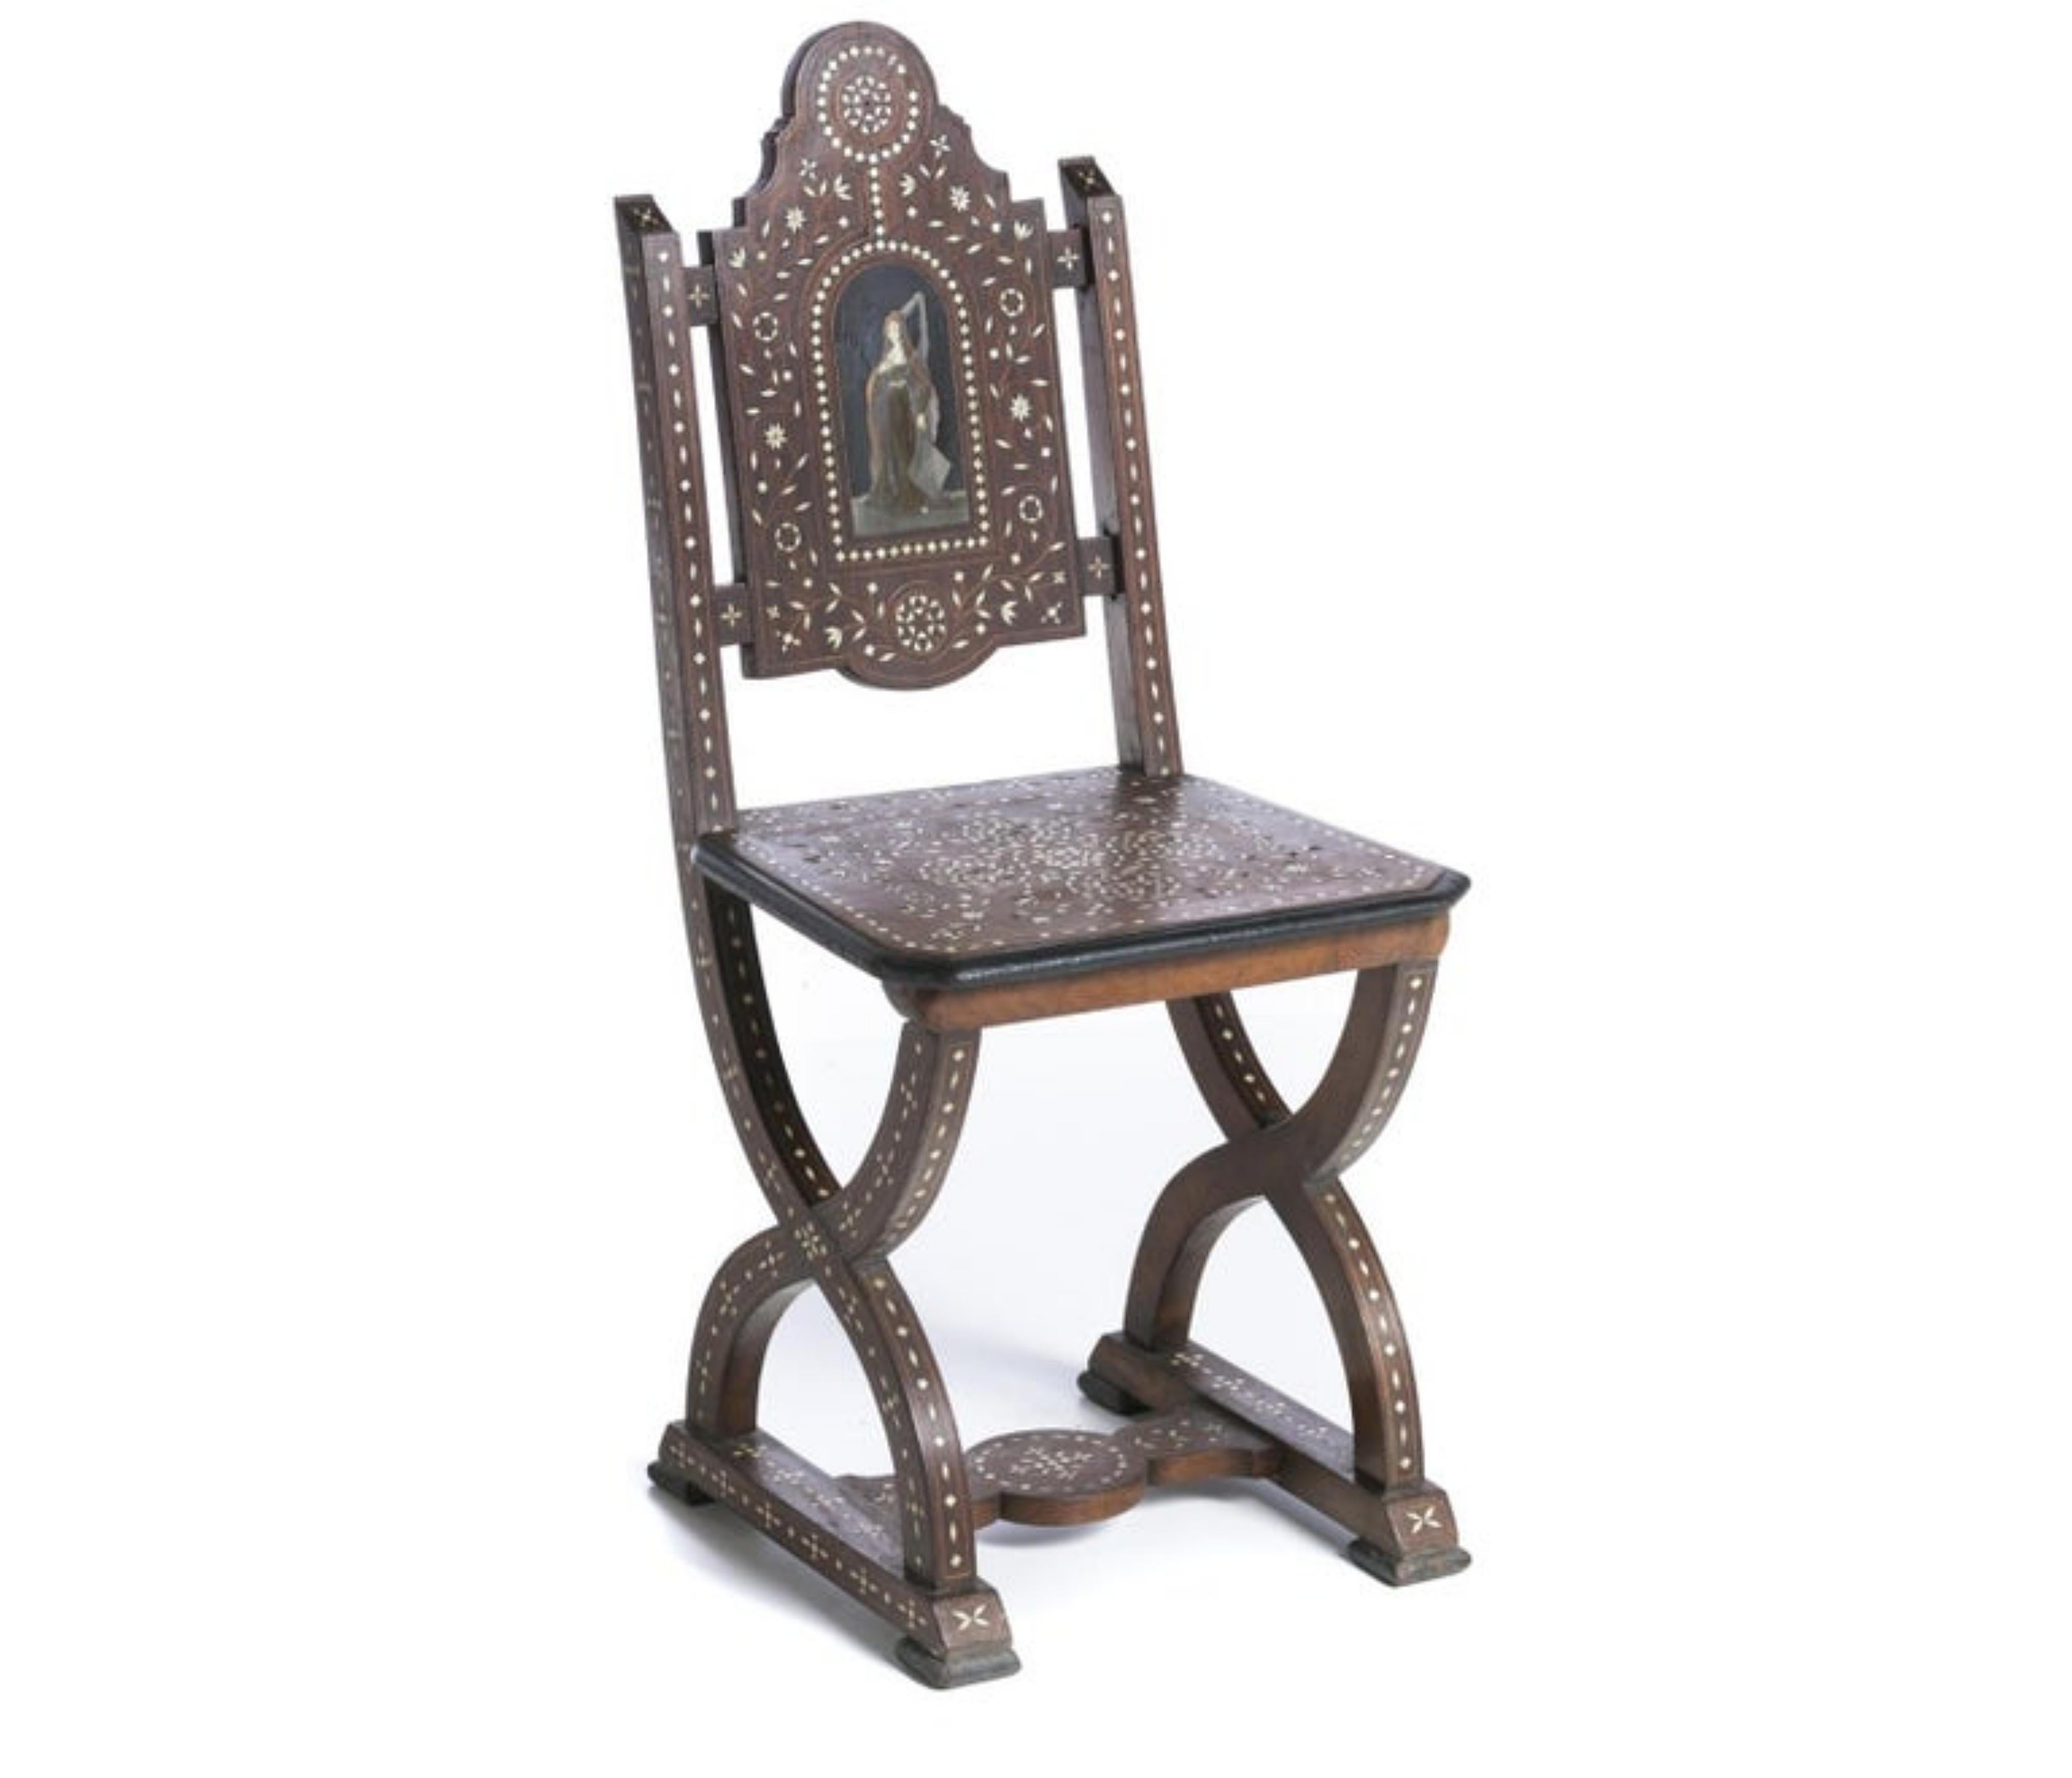 Rare chair

Anglo-Indian, 19th century.
In teak wood with Ivo... inlays, decorated with plant motifs, with a female figure in the centre.
Small flaws.
Dim.: 94.5 x 53.5 x 80 cm.
very good condition.